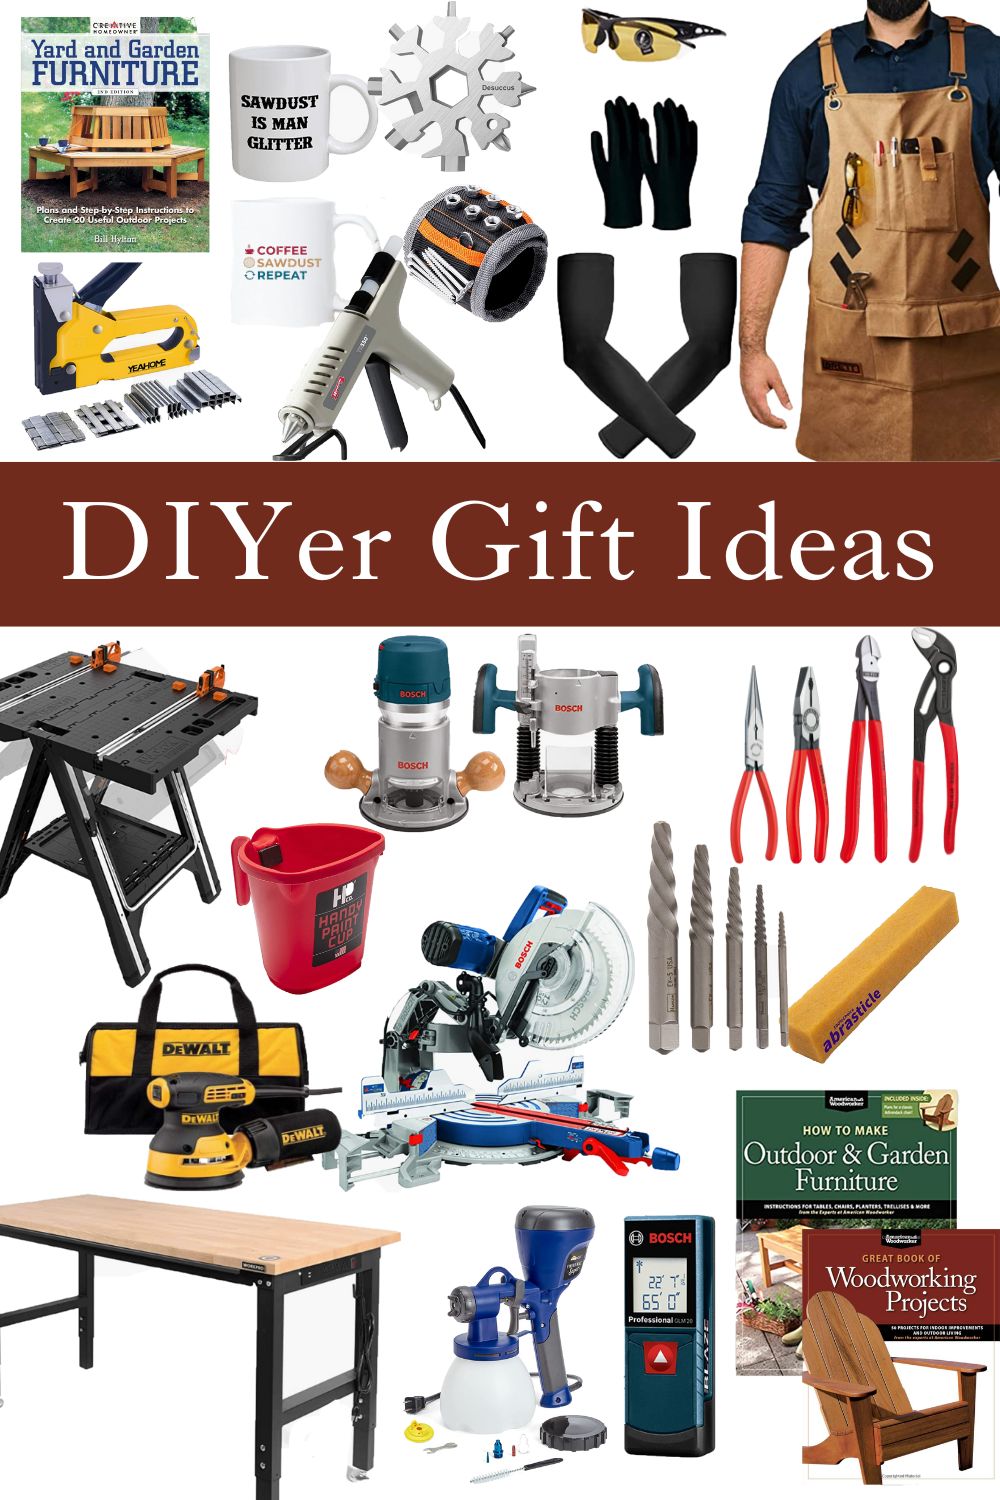 Do It Yourselfer gift ideas